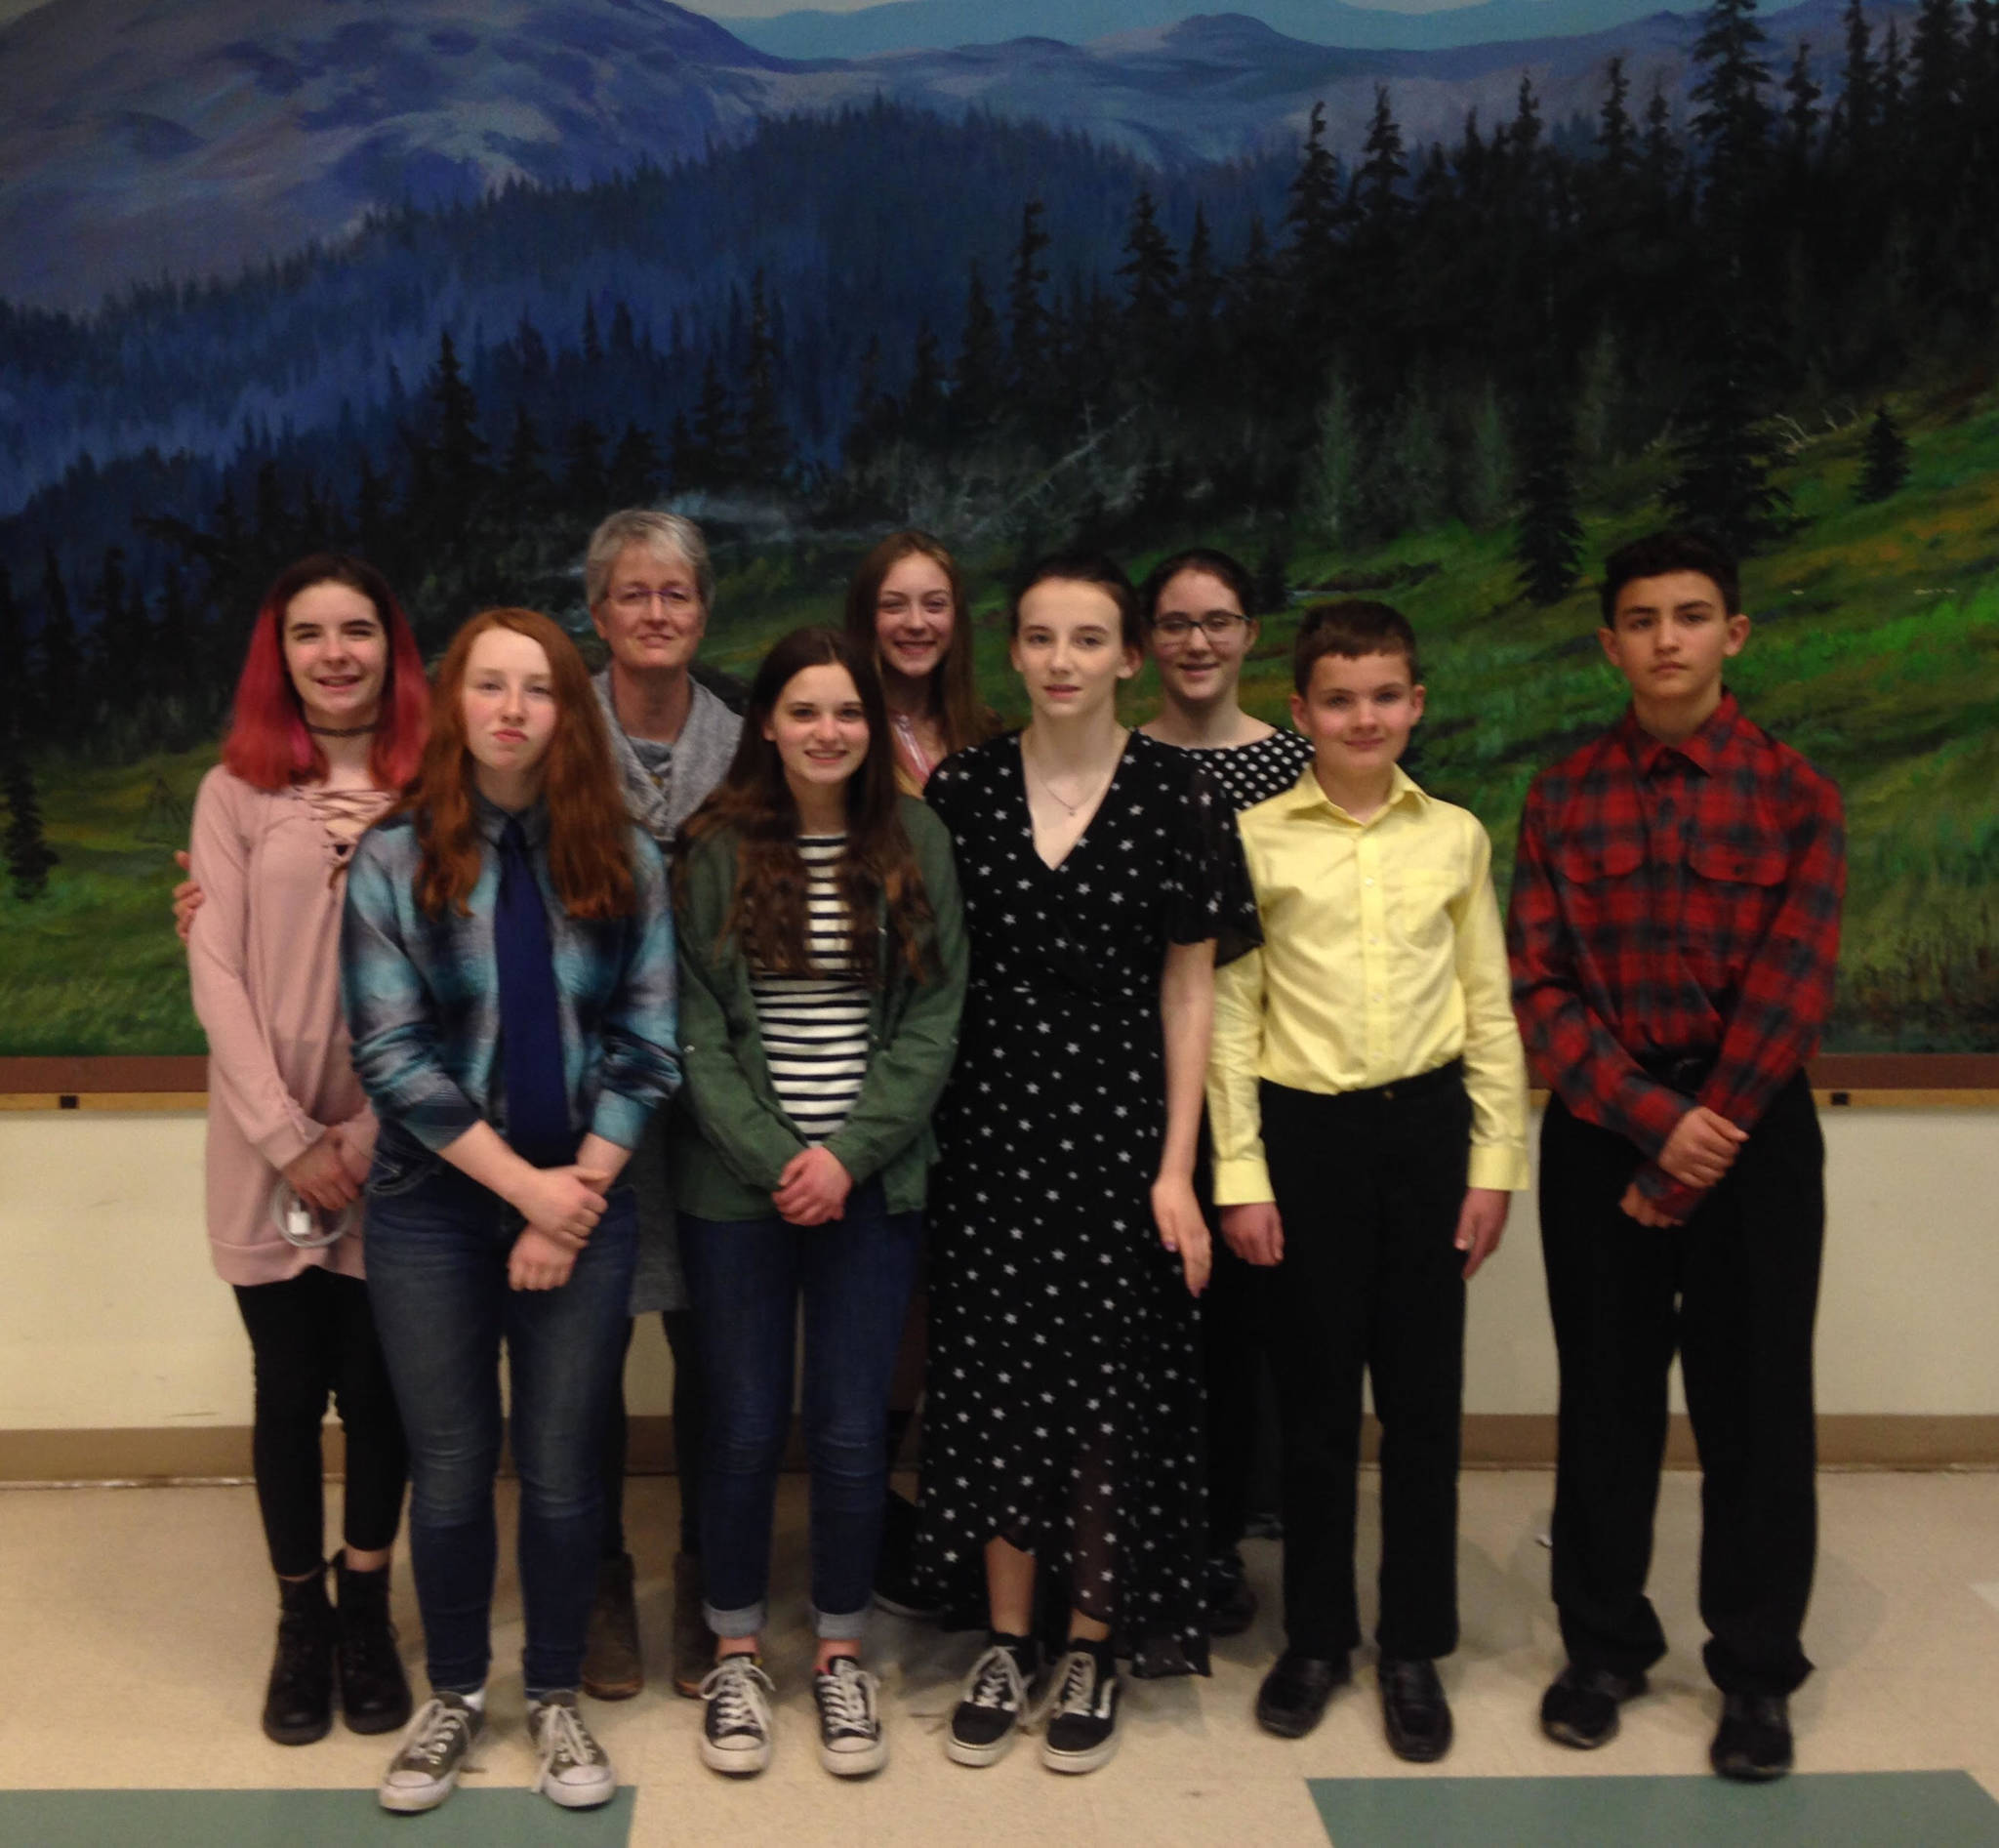 Kenai Middle School students ready to attend the awards banquet.